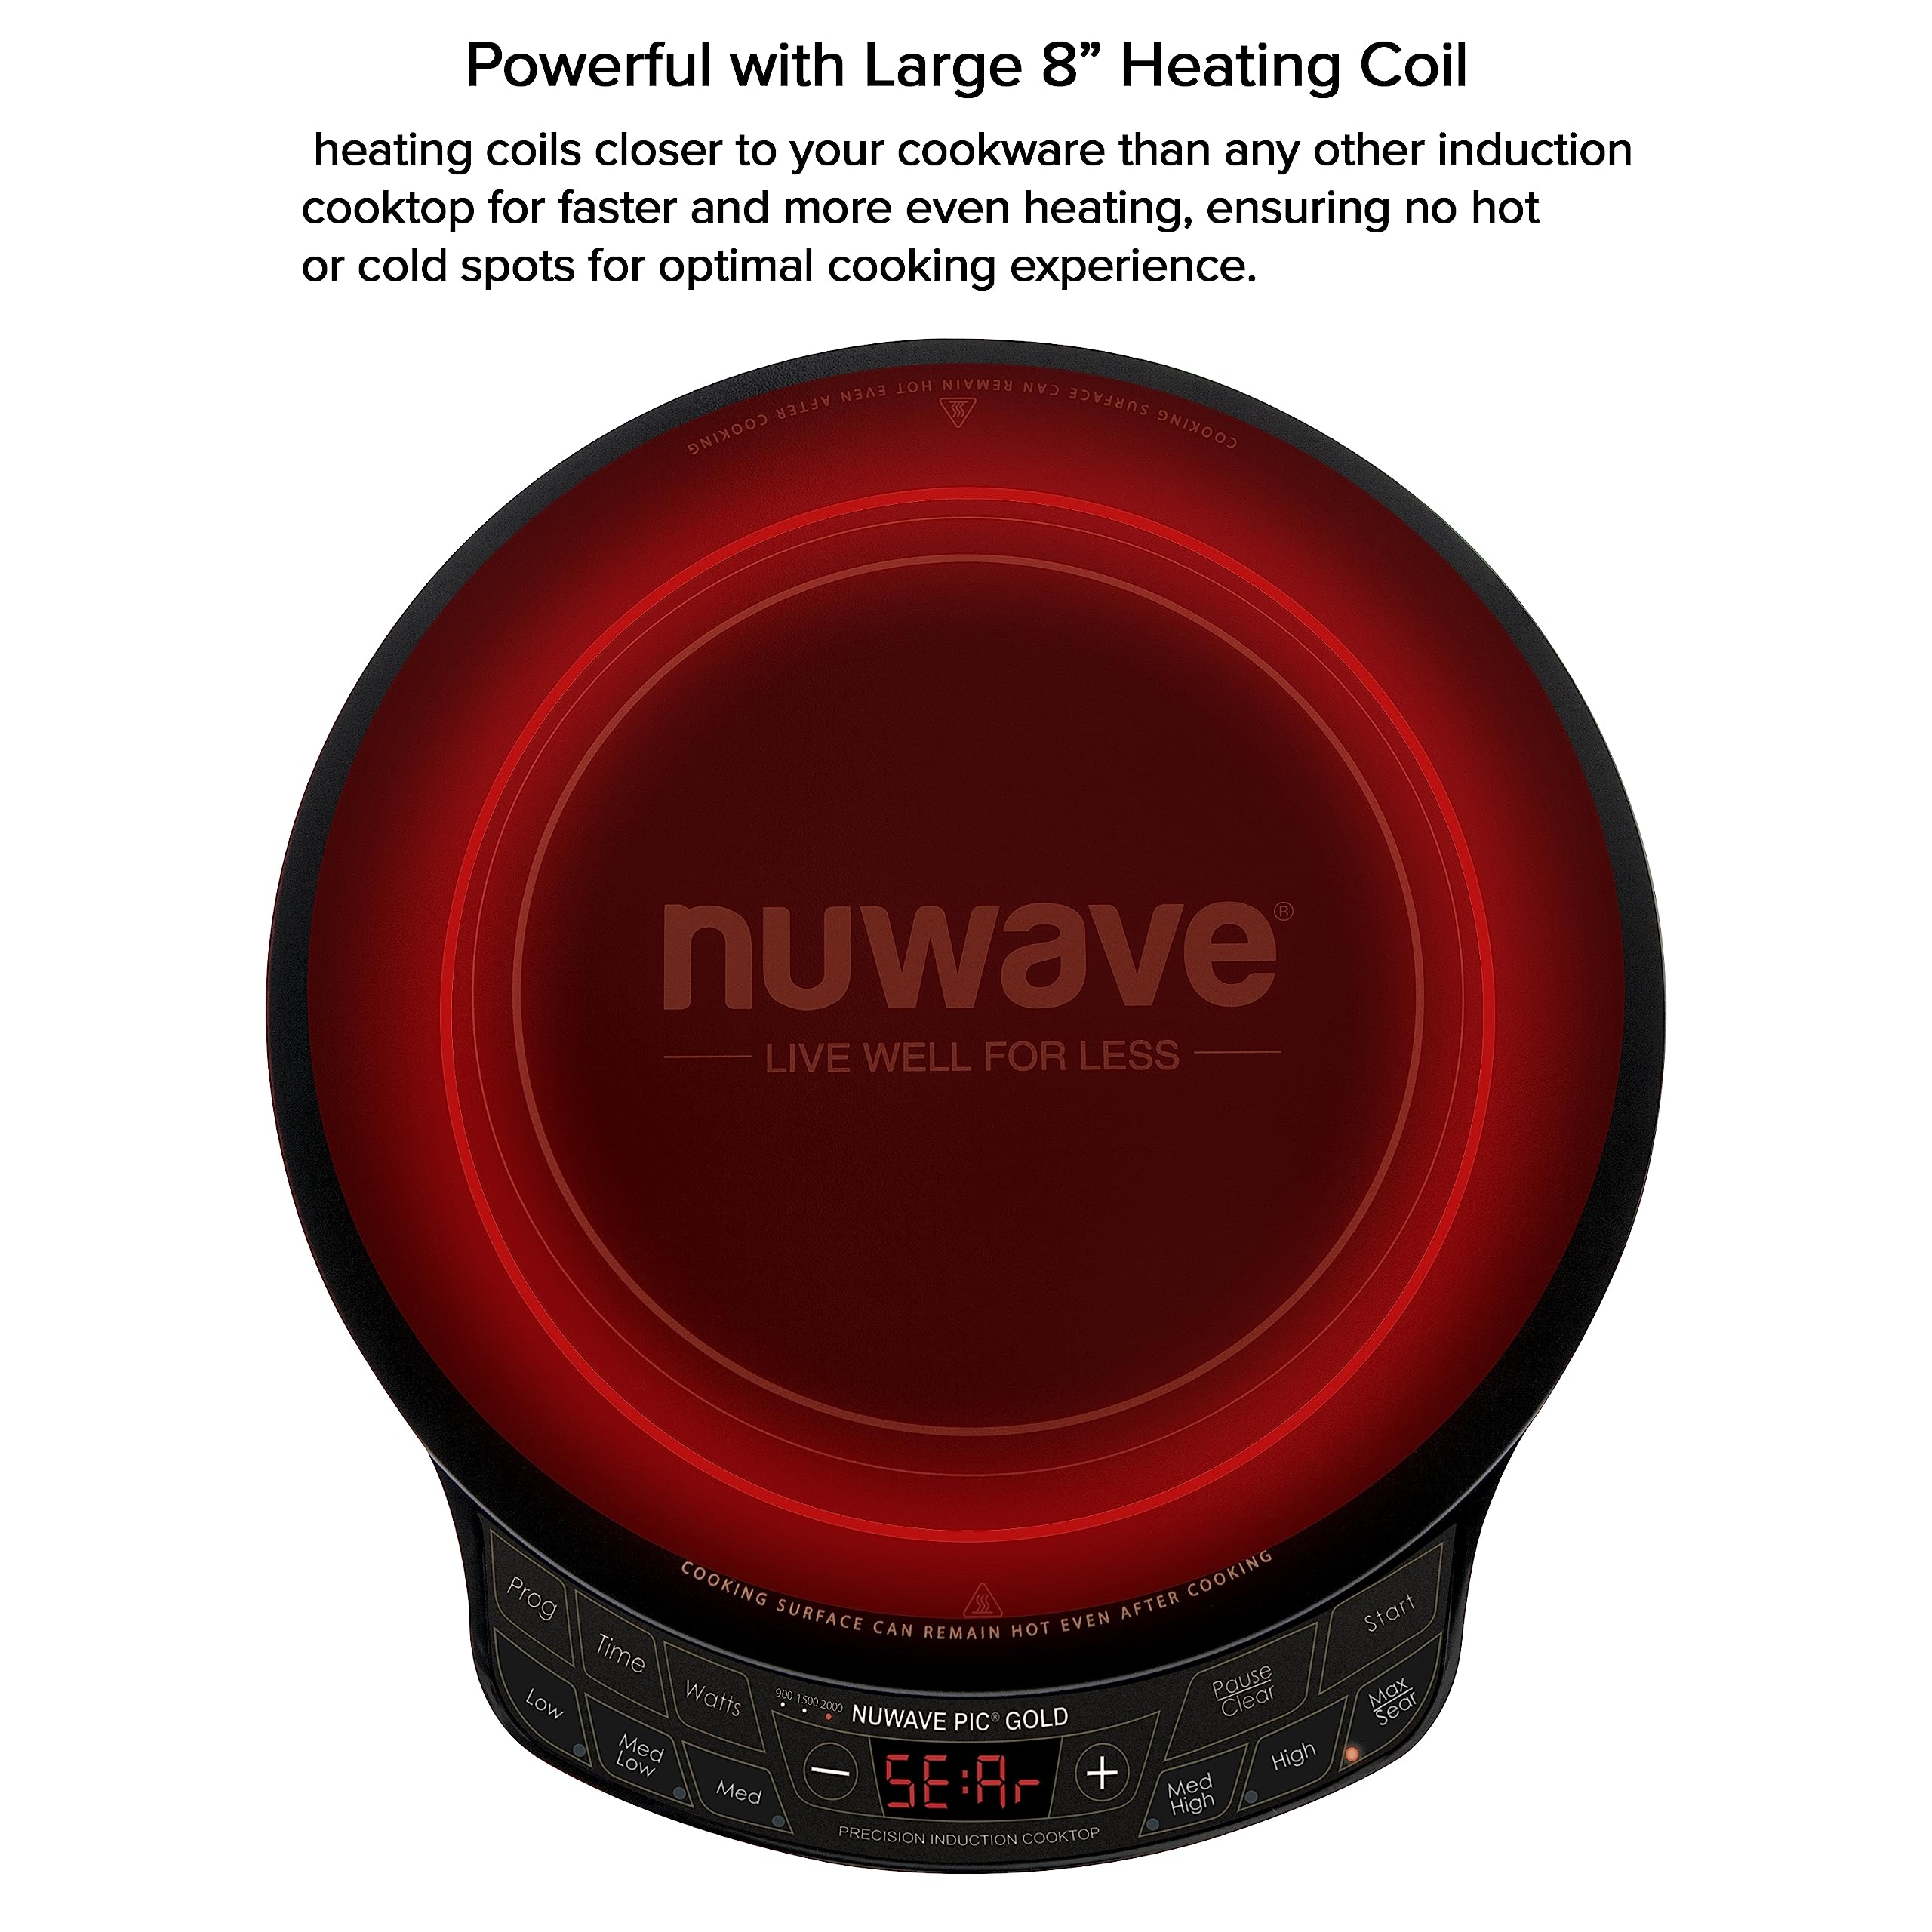 Nuwave Precision Induction Cooktop Gold, 12” Shatter-Proof Ceramic Glass Surface, Large 8” Heating Coil, Portable, 51Temp Settings 100°F to 575°F, 3 Wattage Settings 600, 900, and 1500 Watts